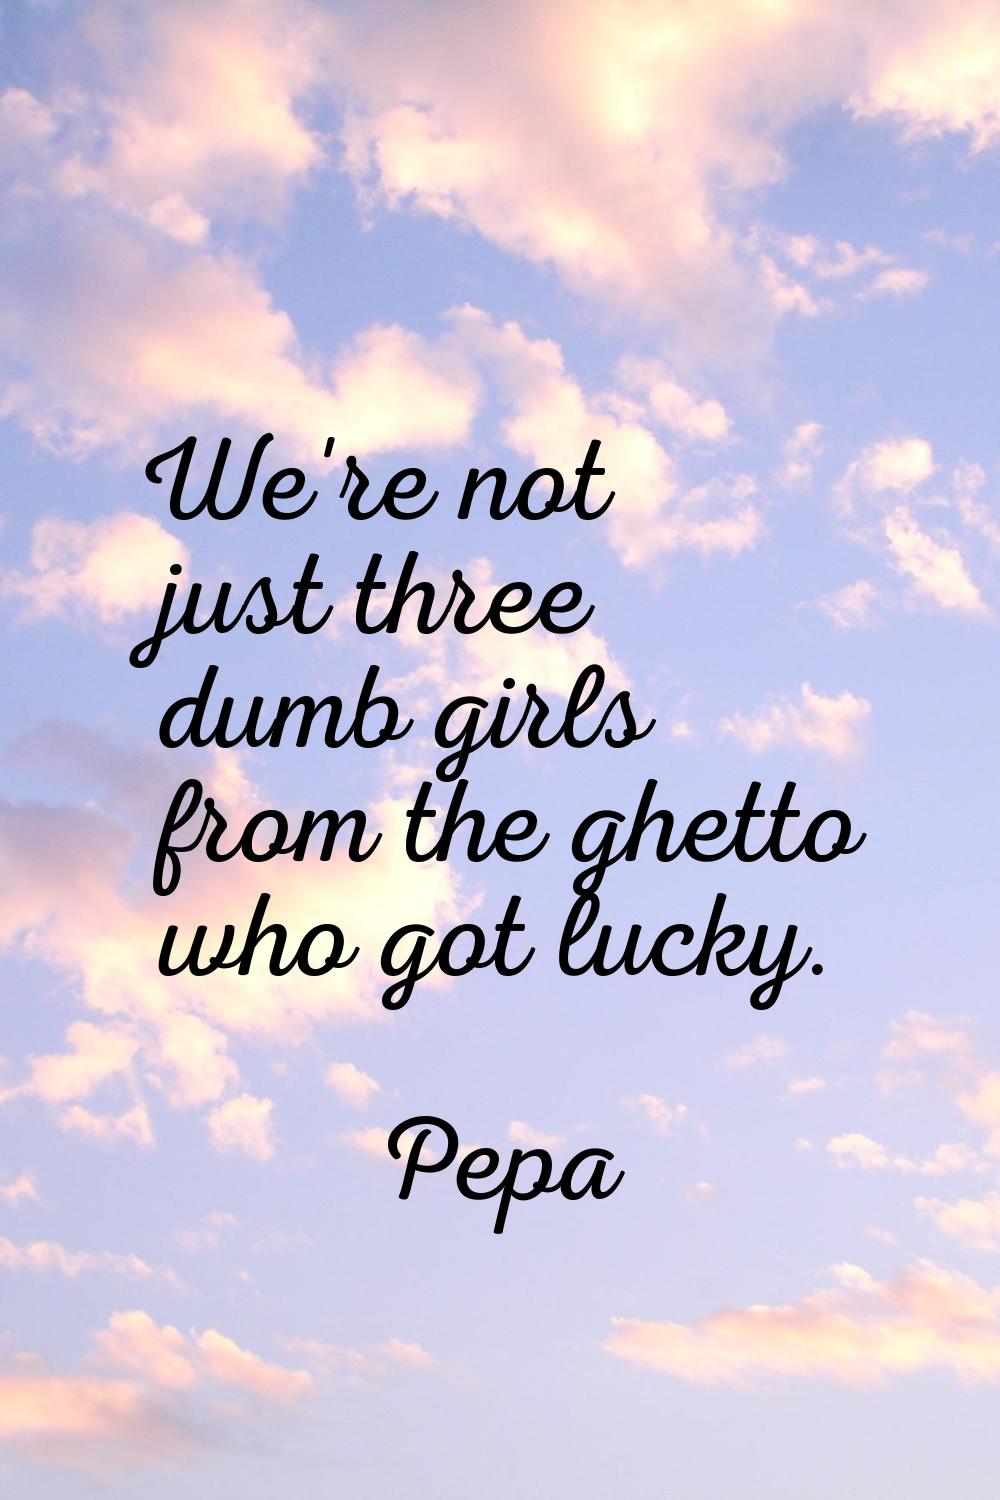 We're not just three dumb girls from the ghetto who got lucky.